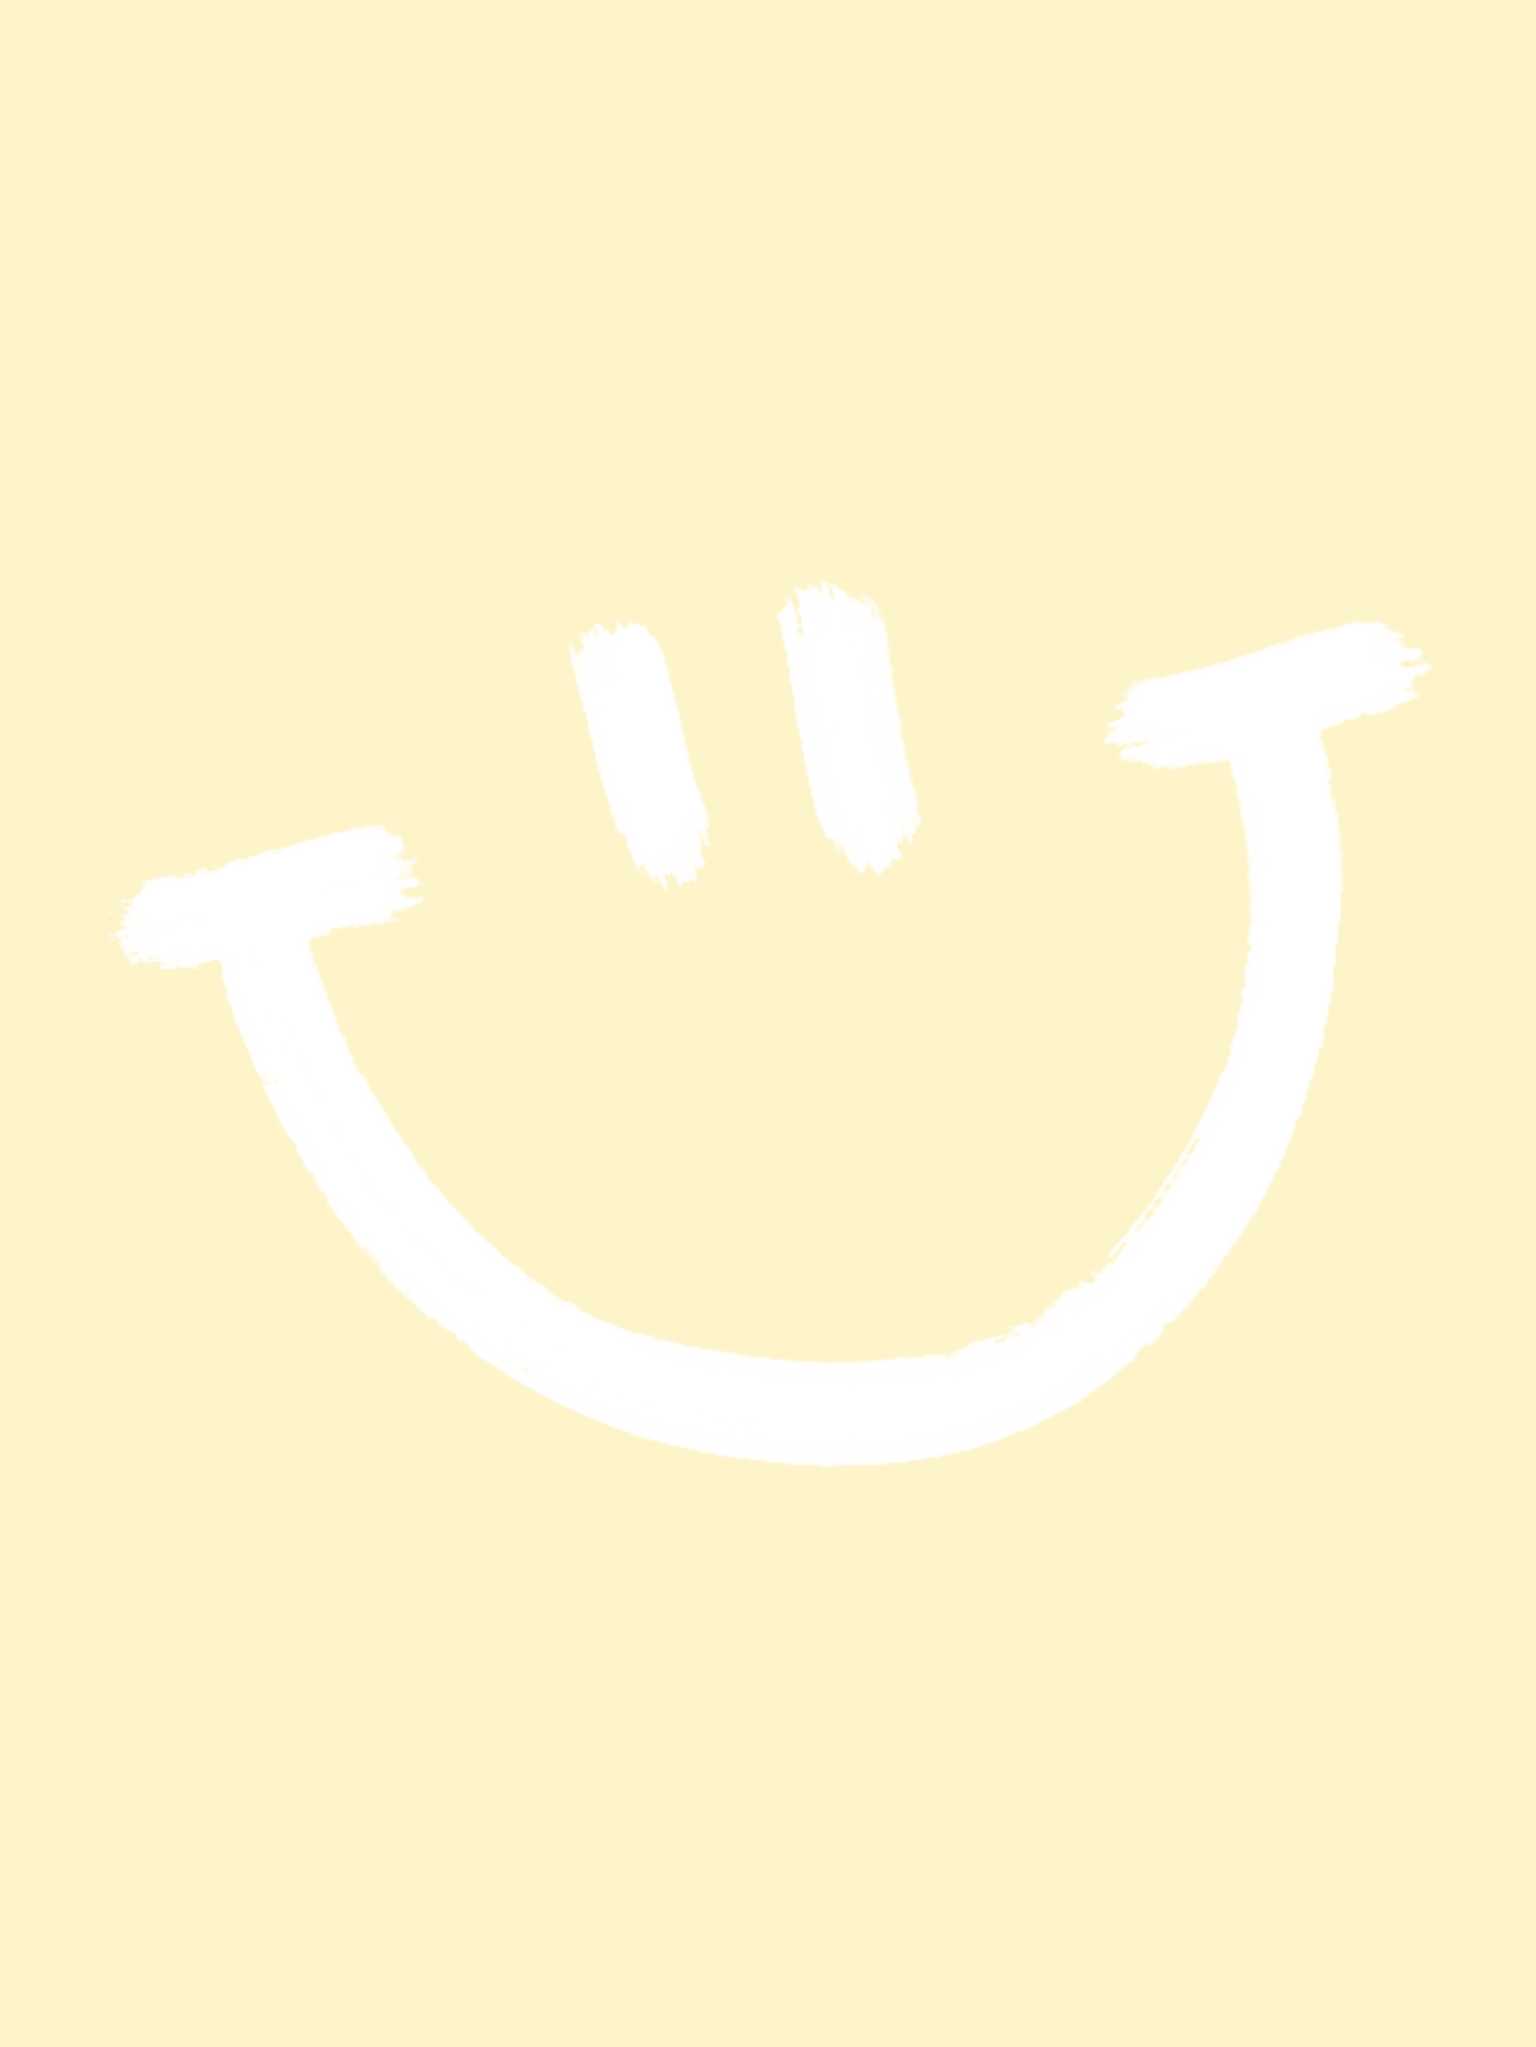 Smiley face wallpaper background Preppy wallpaper Iphone